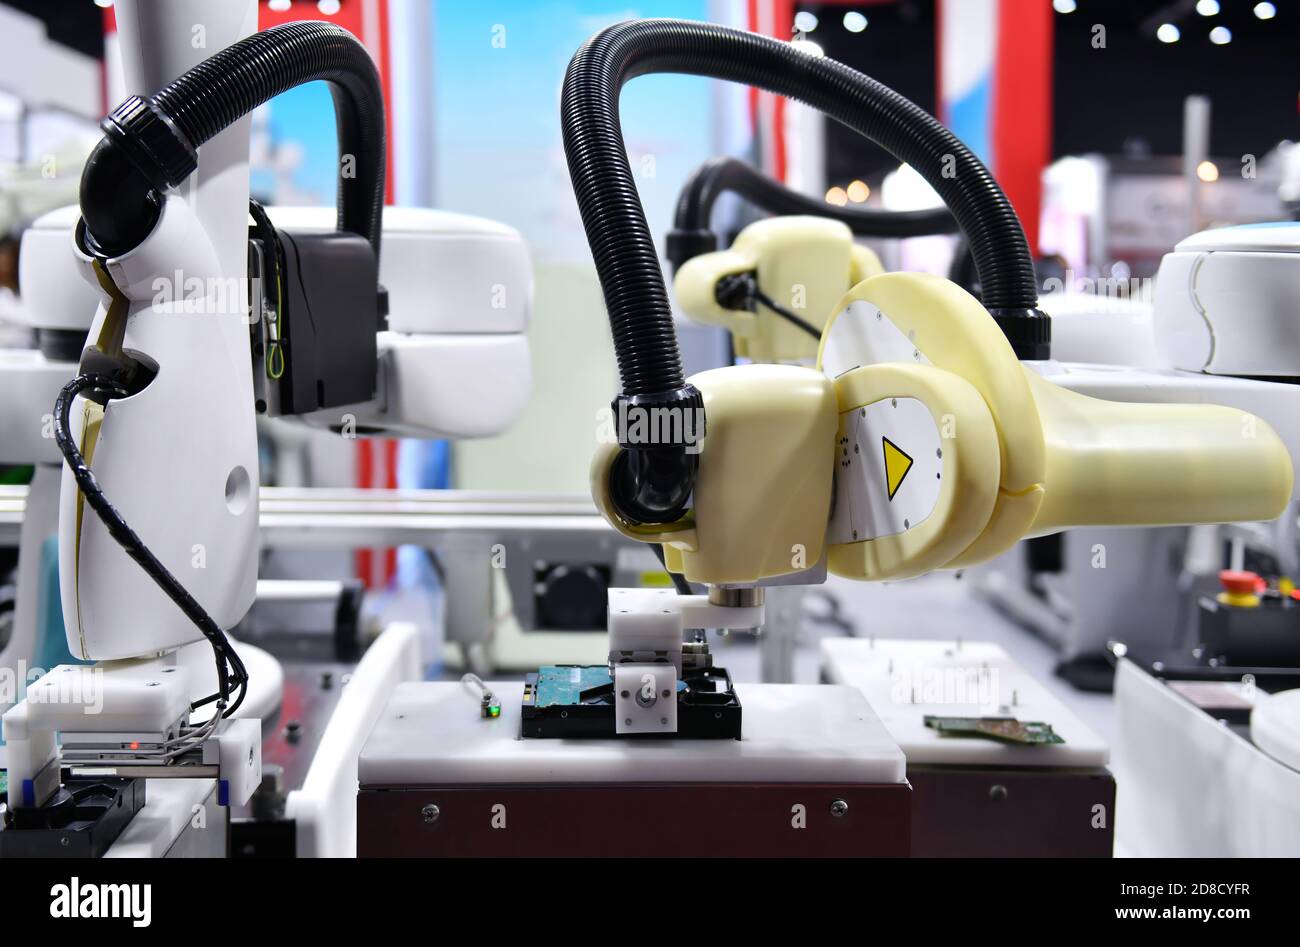 Industrial Robotic Arm for holding Electronic circuit board production in machinery and technology Stock Photo